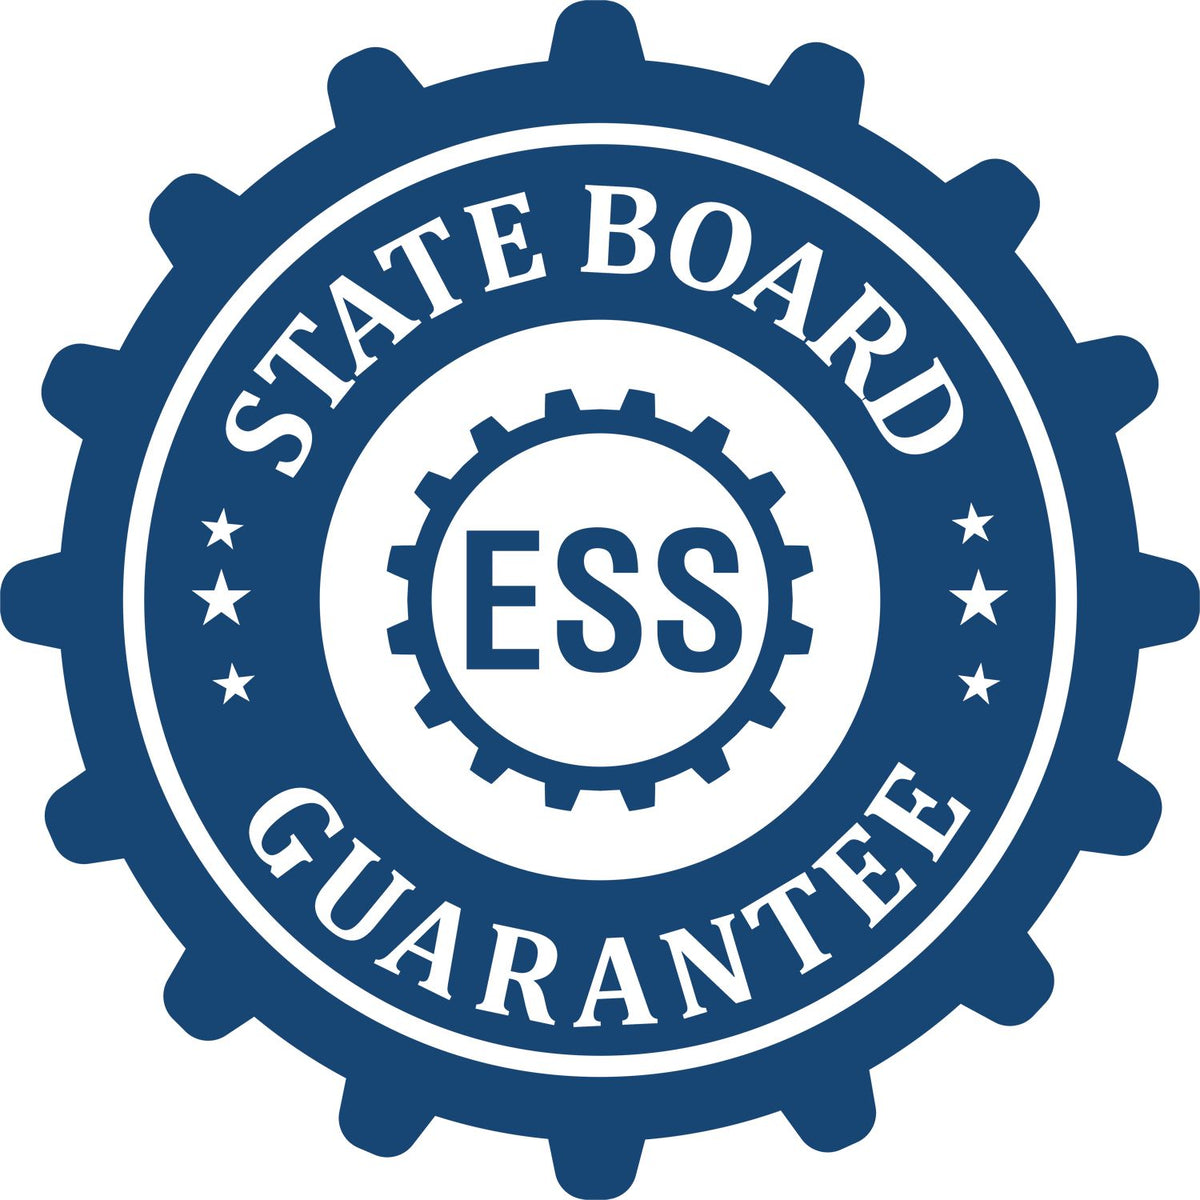 An emblem in a gear shape illustrating a state board guarantee for the Tennessee Desk Architect Embossing Seal product.